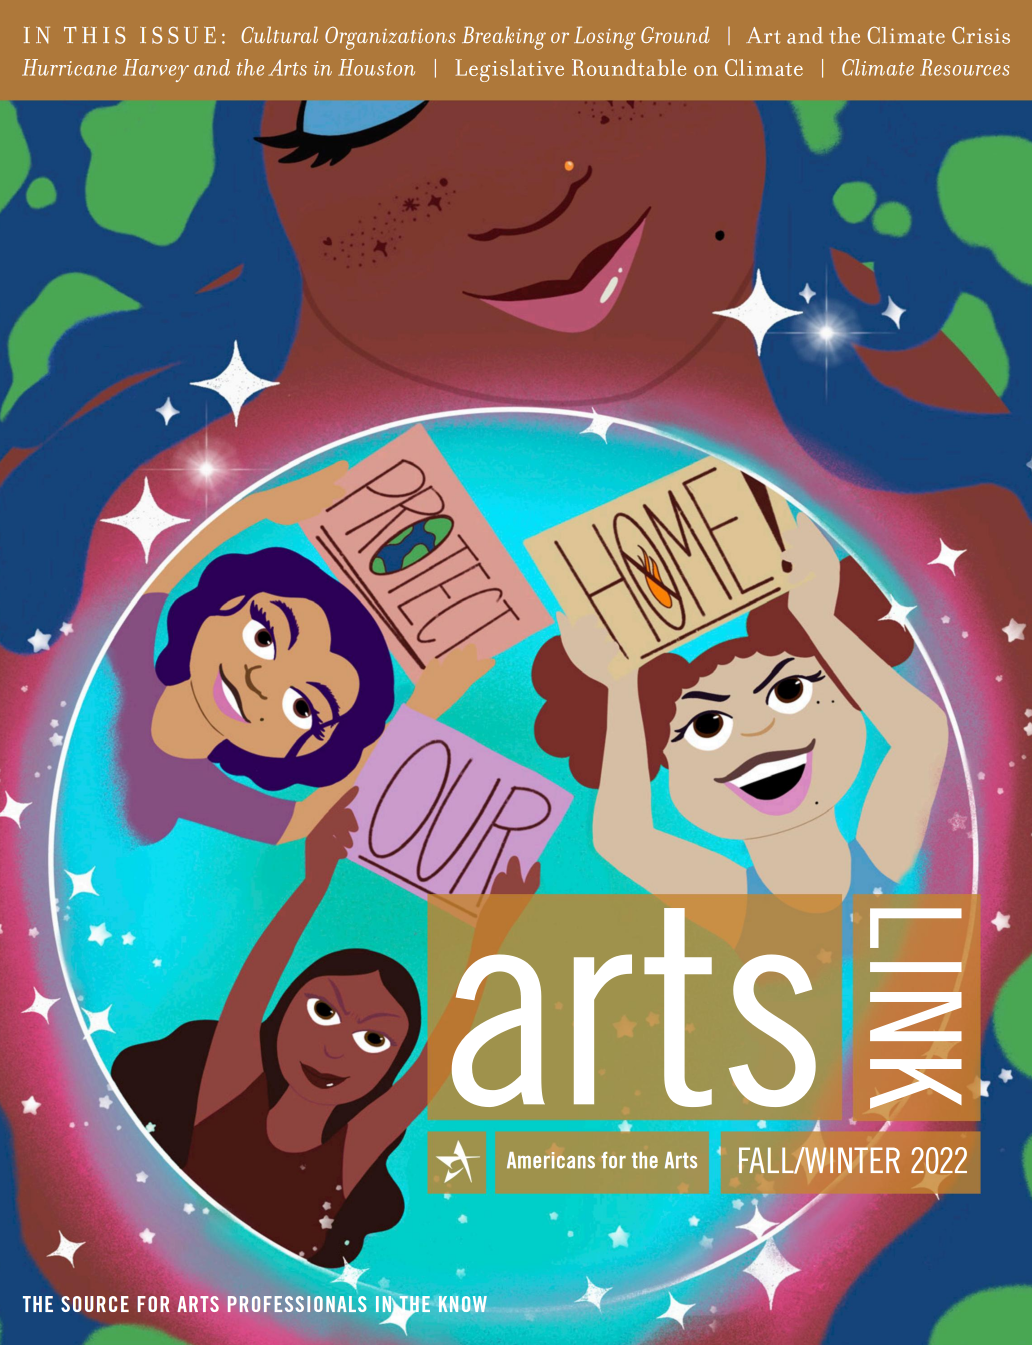 Front cover of Arts Link Fall/Winter 2022 featuring illustrations of a person looking into a looking glass. In the glass are three people smiling and holding signs saying "Protect Our Home"